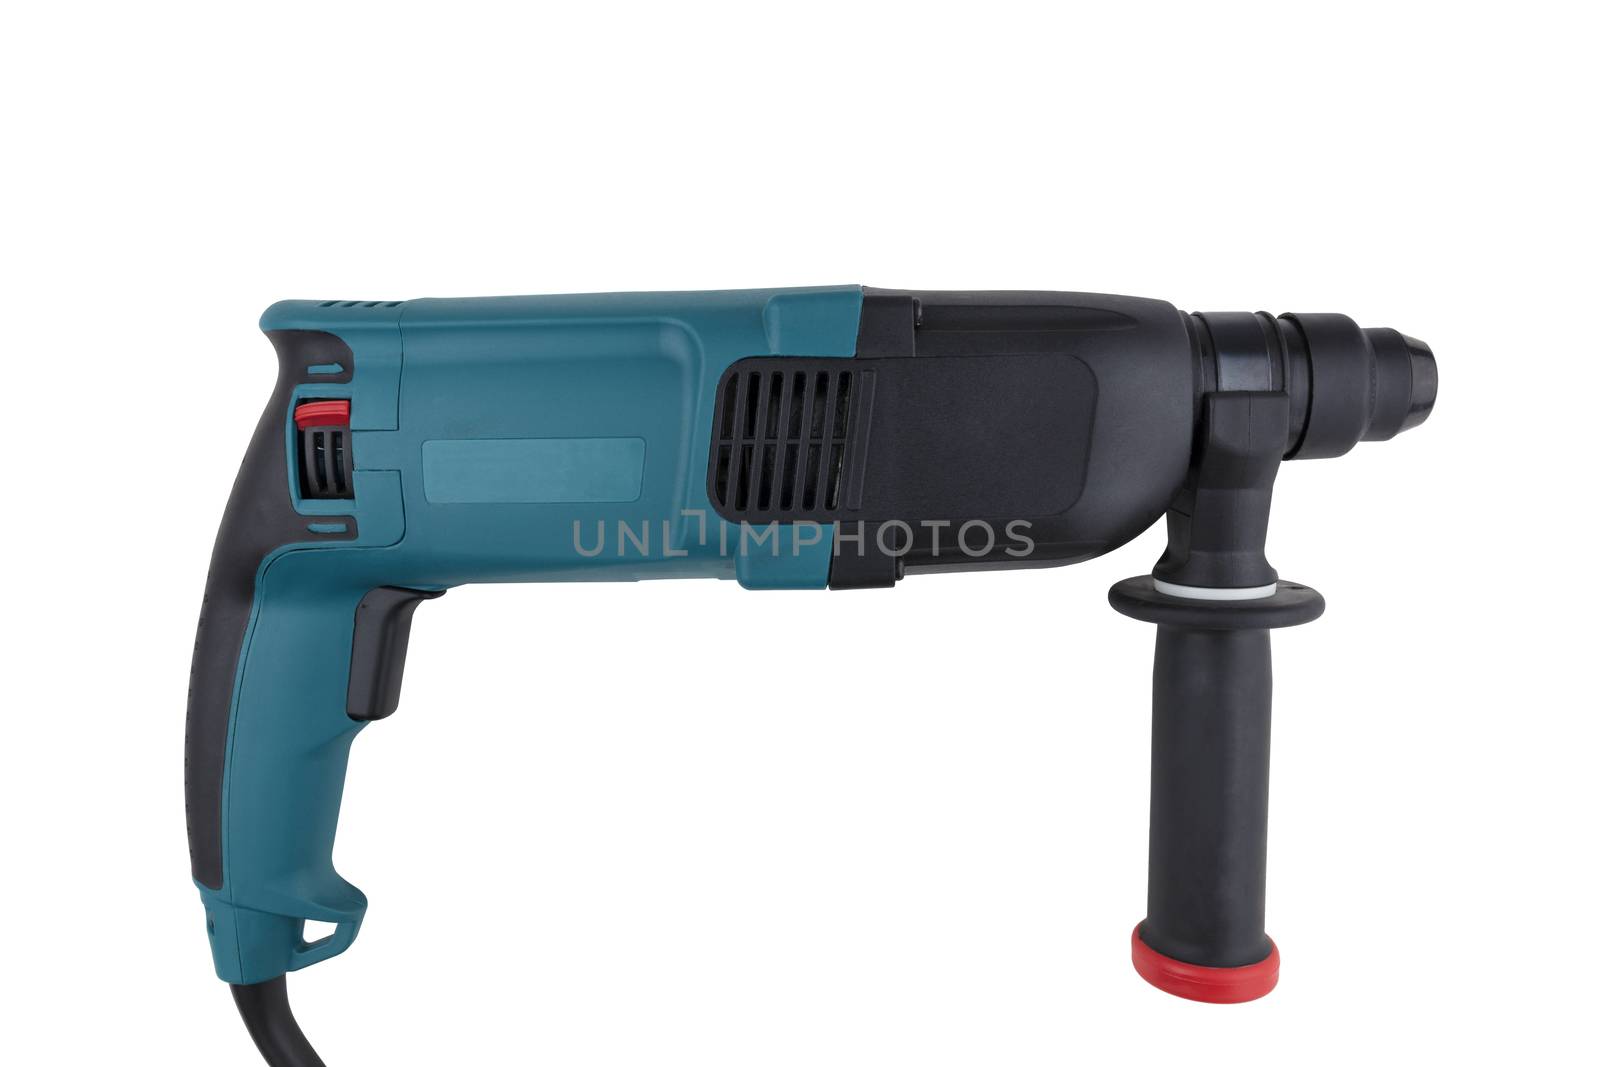 Manual electric drill-puncher of black and turquoise color for professional work in construction, isolated on white background